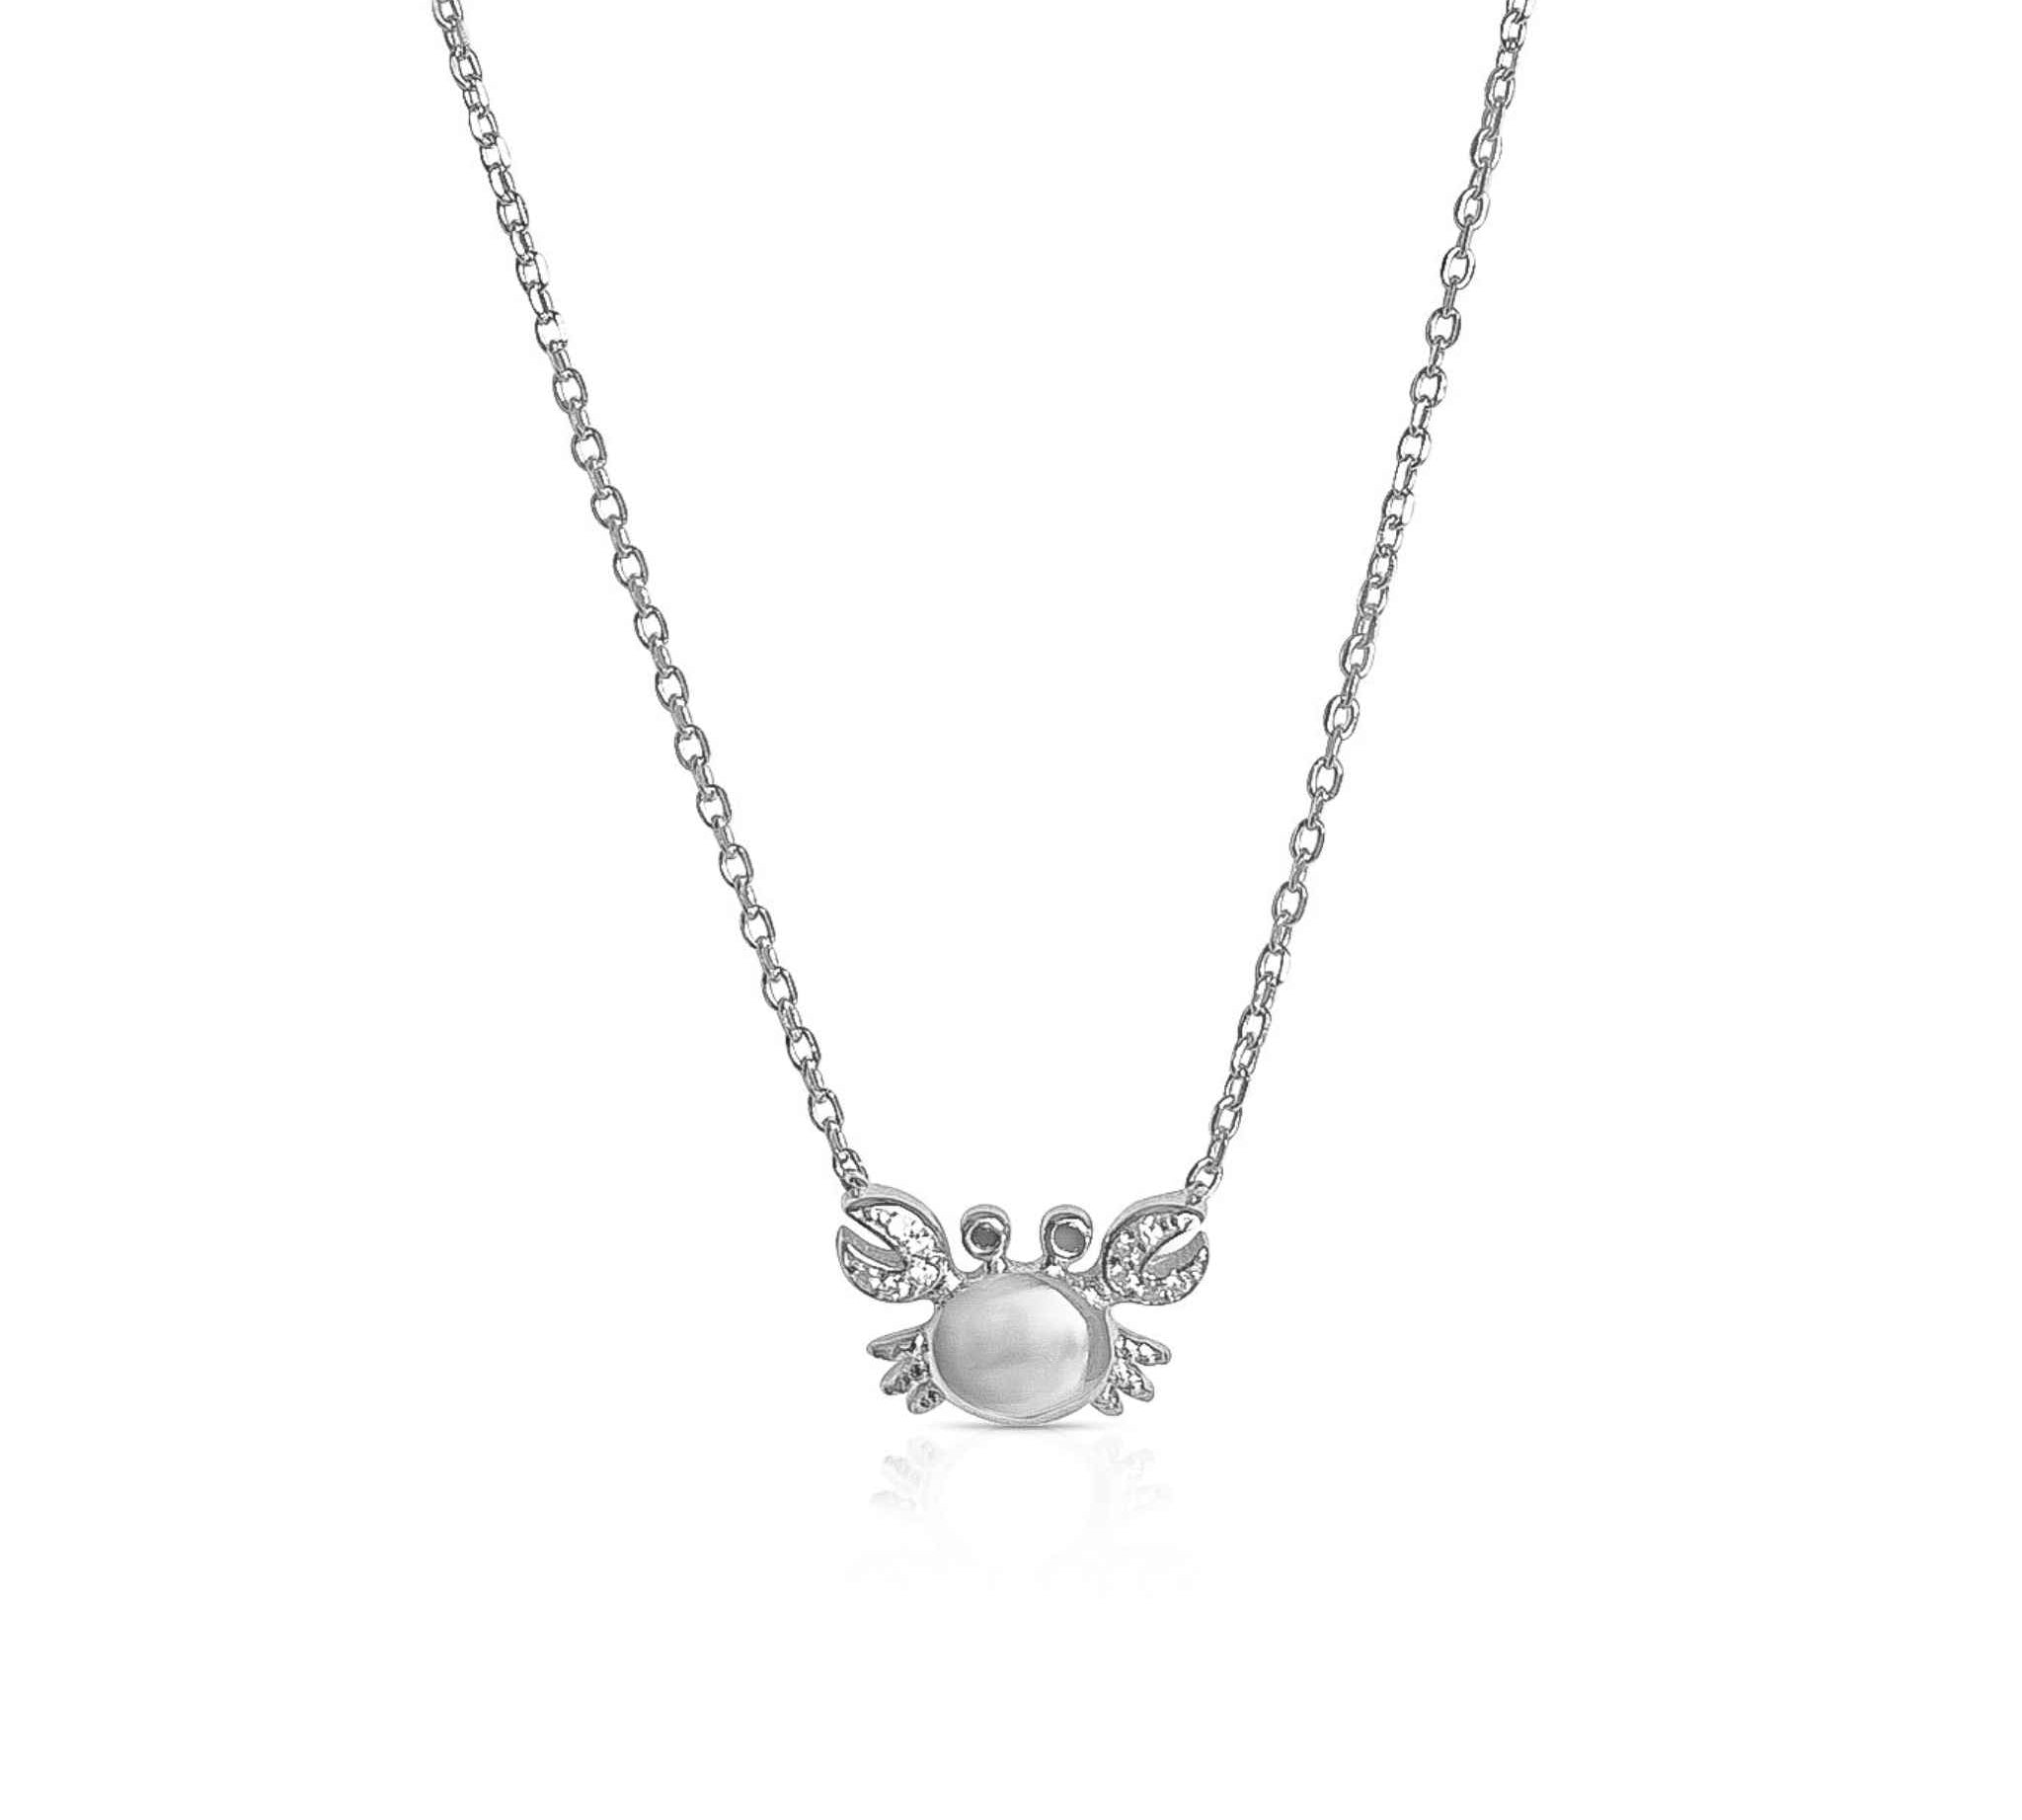 Sterling silver Crab Pendant Necklace with cubic zirconia claws from Alessandra James.